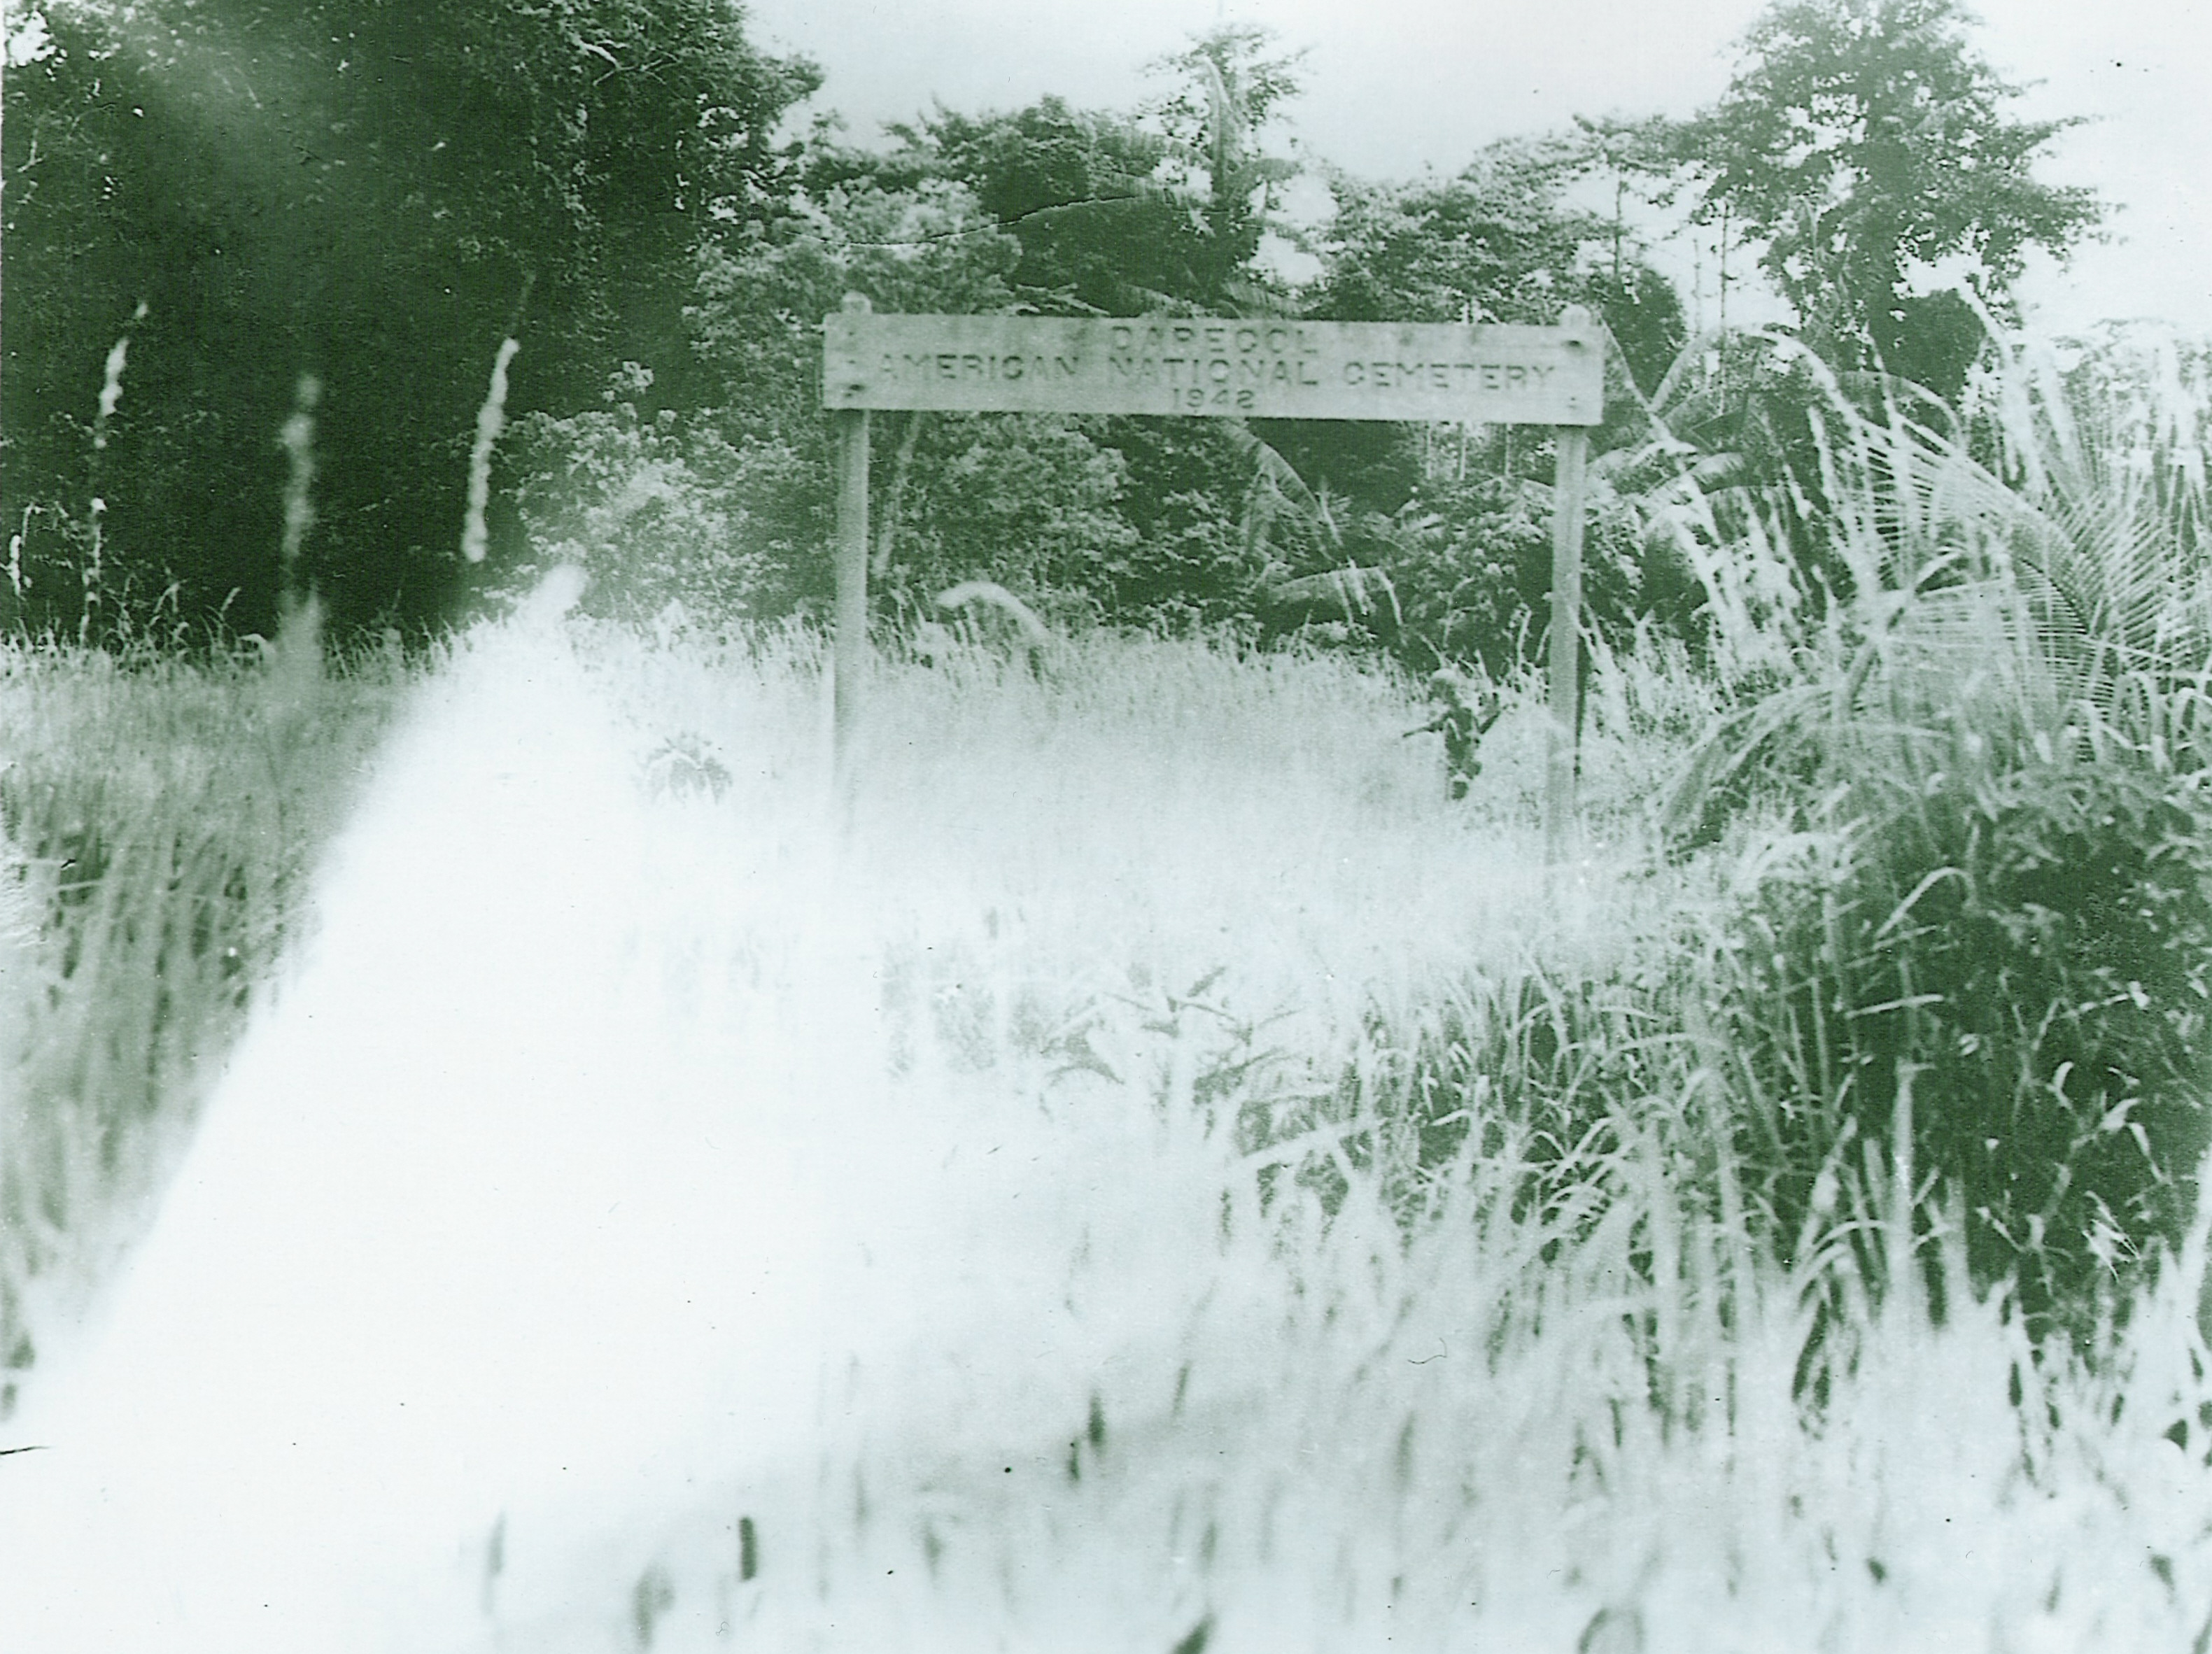 American National Cemetery, Davao Penal Colony, Philippines, date unknown